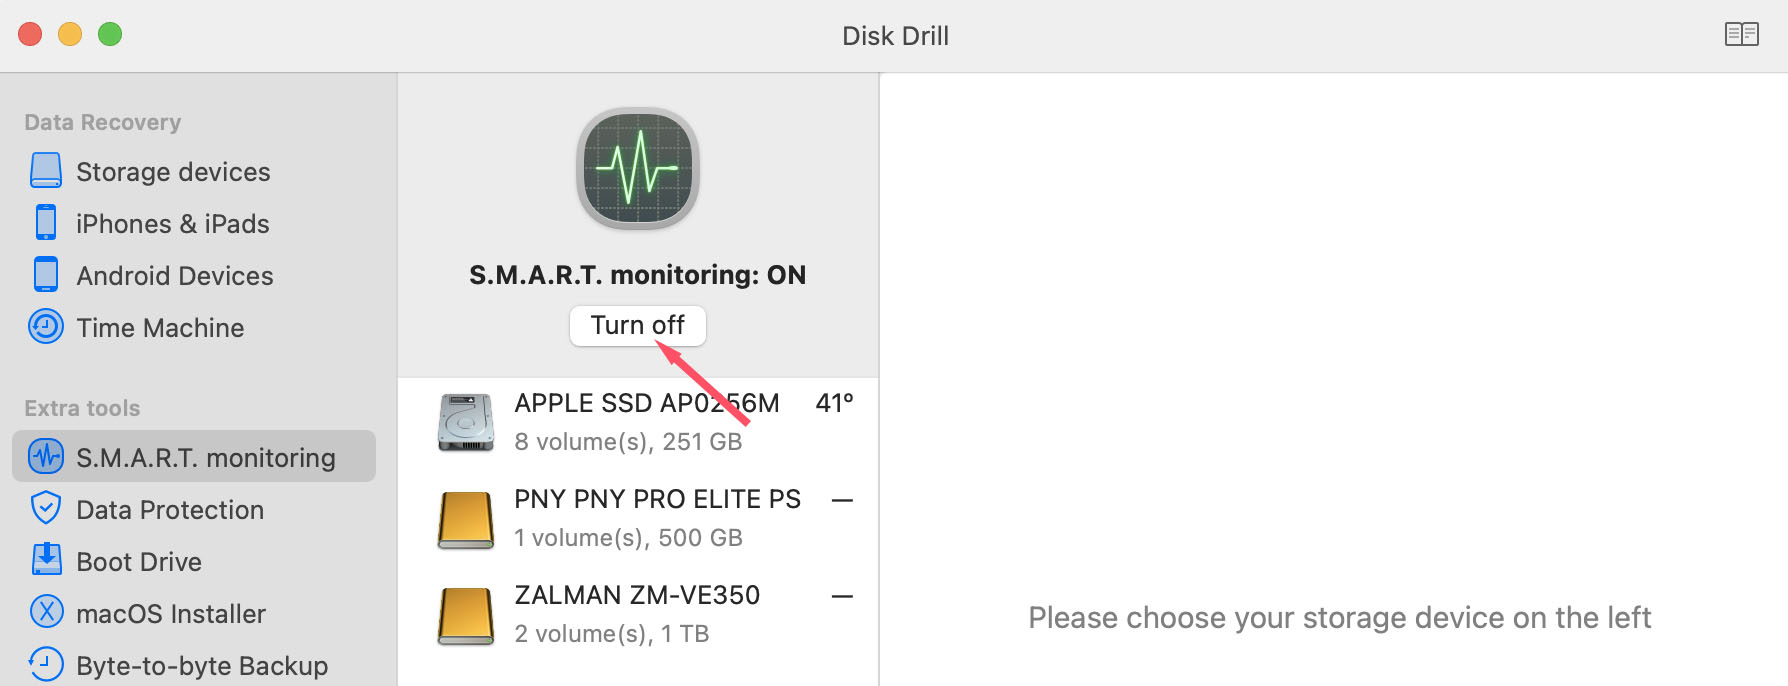 how to turn off smart disk monitoring in disk drill for macos